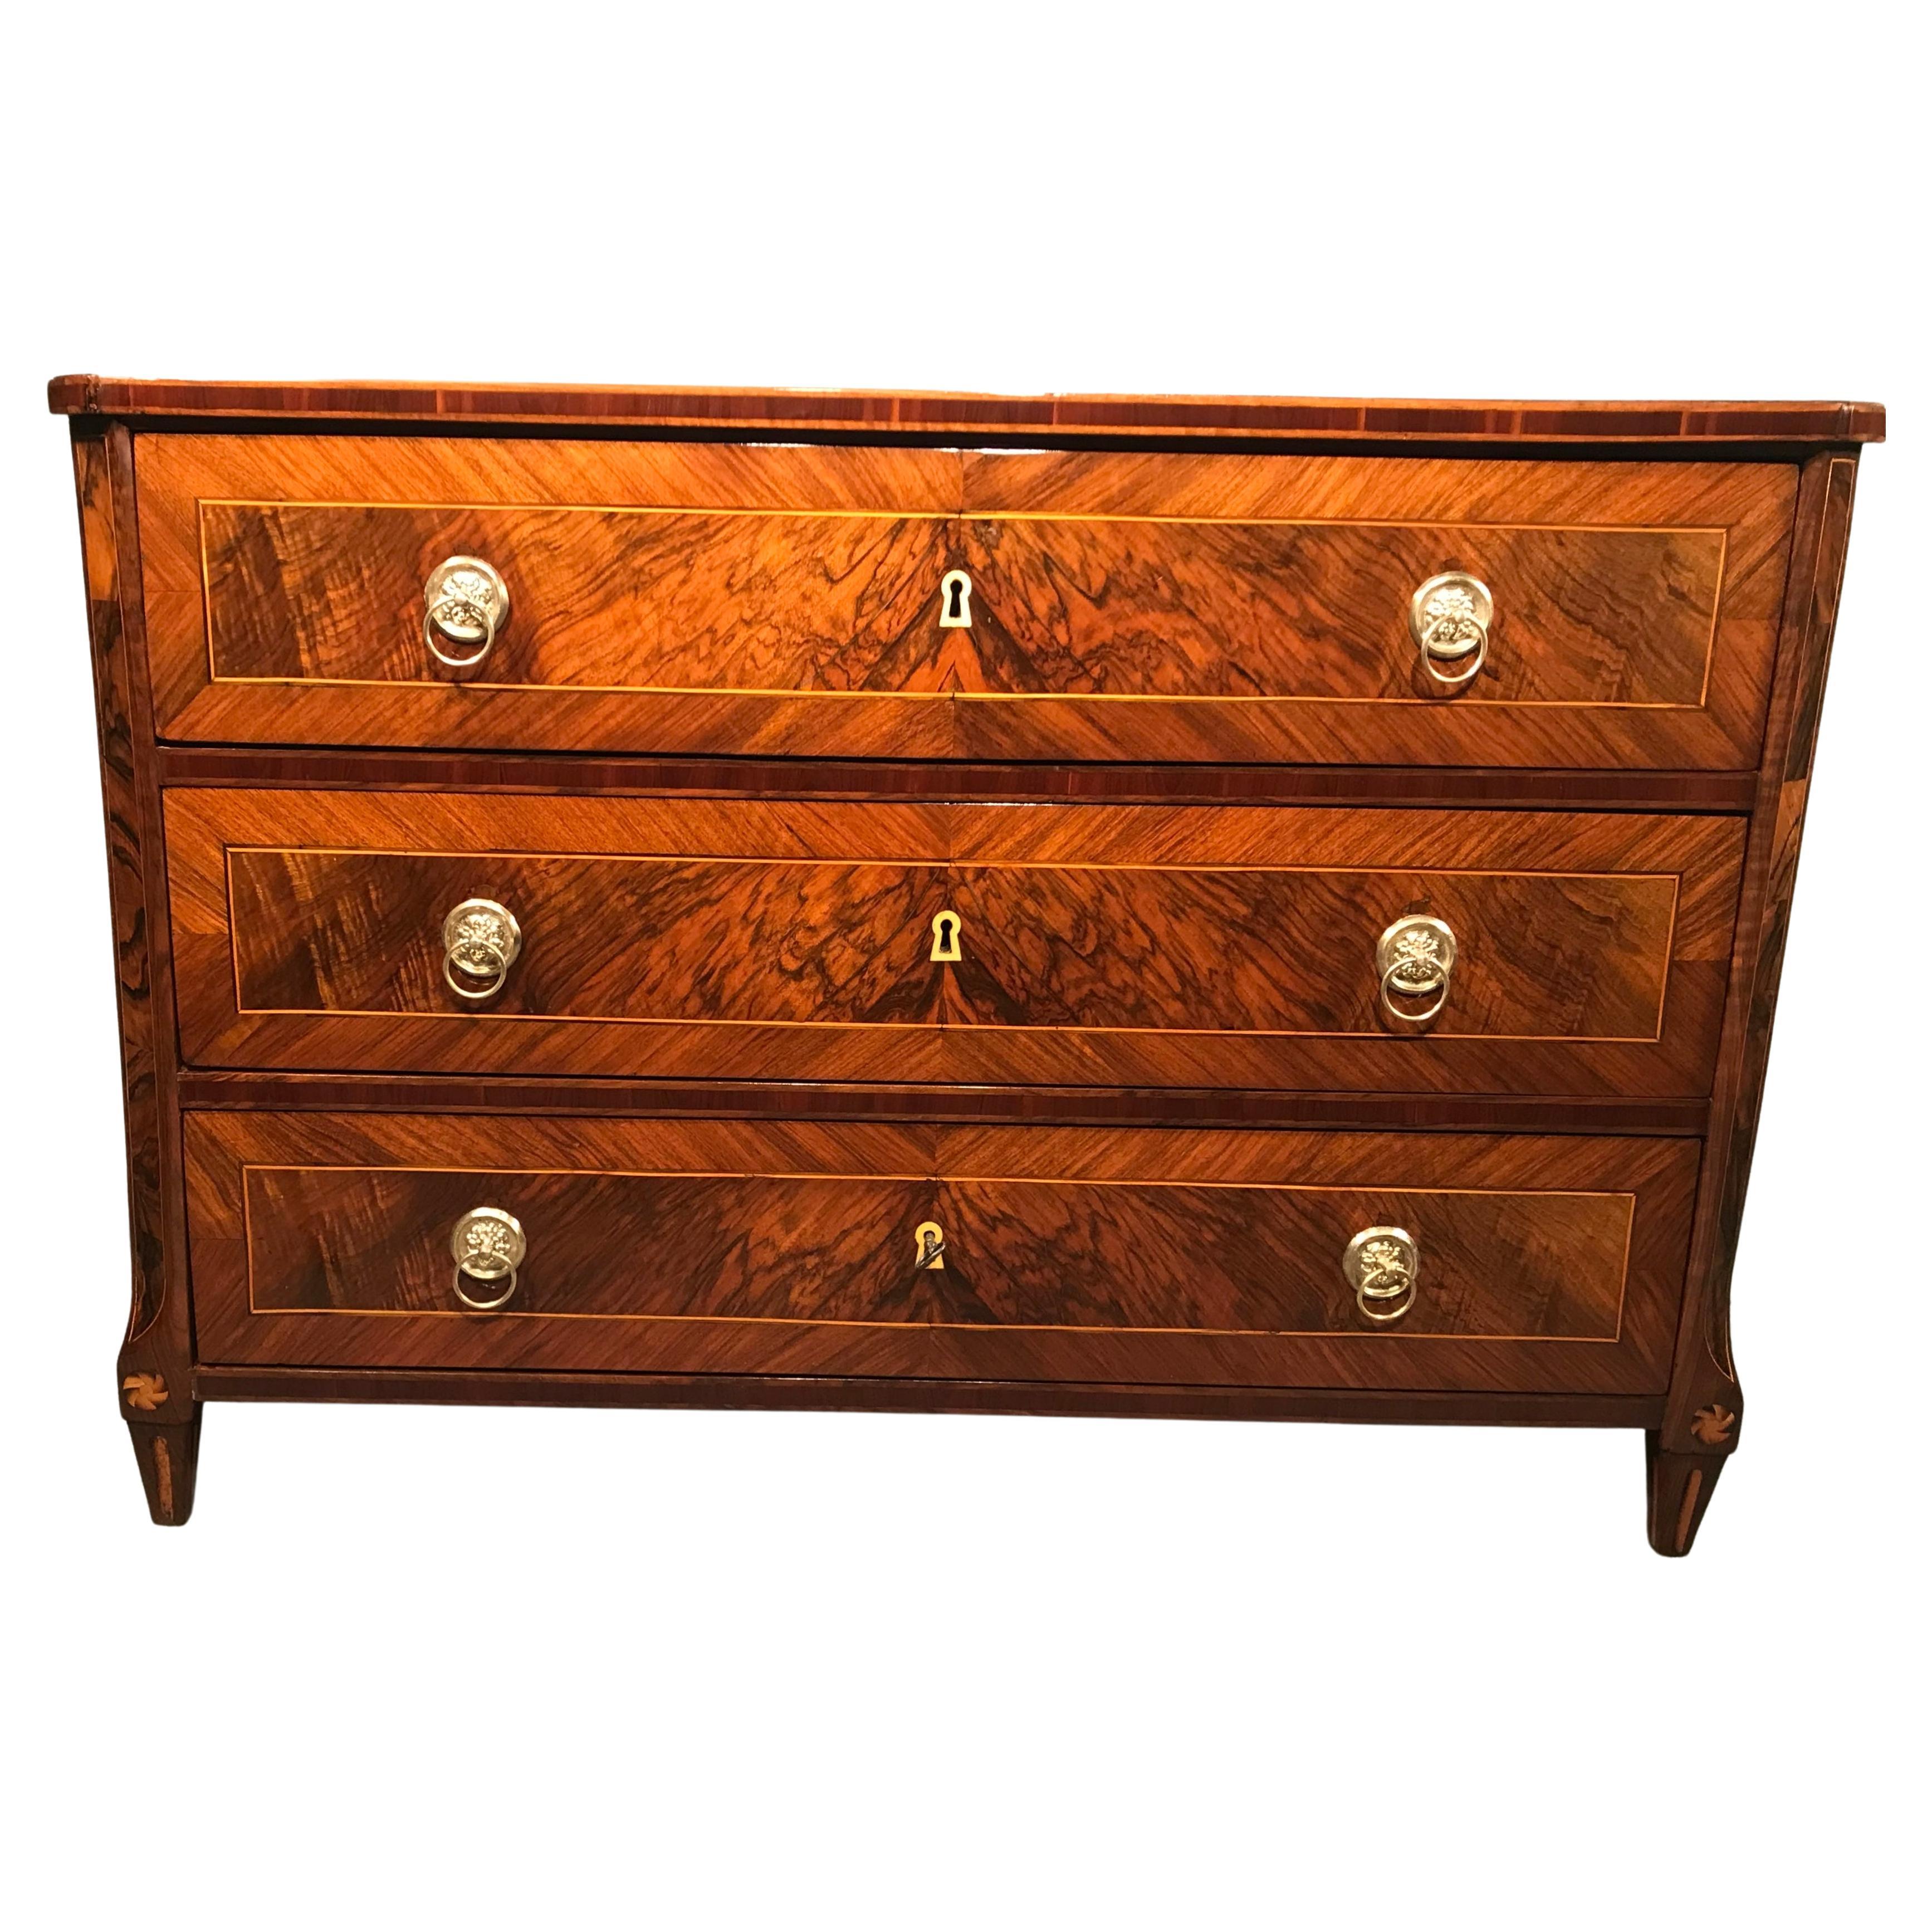 This elegant Neoclassical chest of drawers comes from Germany and dates back to around 1780-1800. 
It stands out for its beautiful variations of walnut veneer grains. The top of the three drawer commode features a mirrored walnut root veneer. The